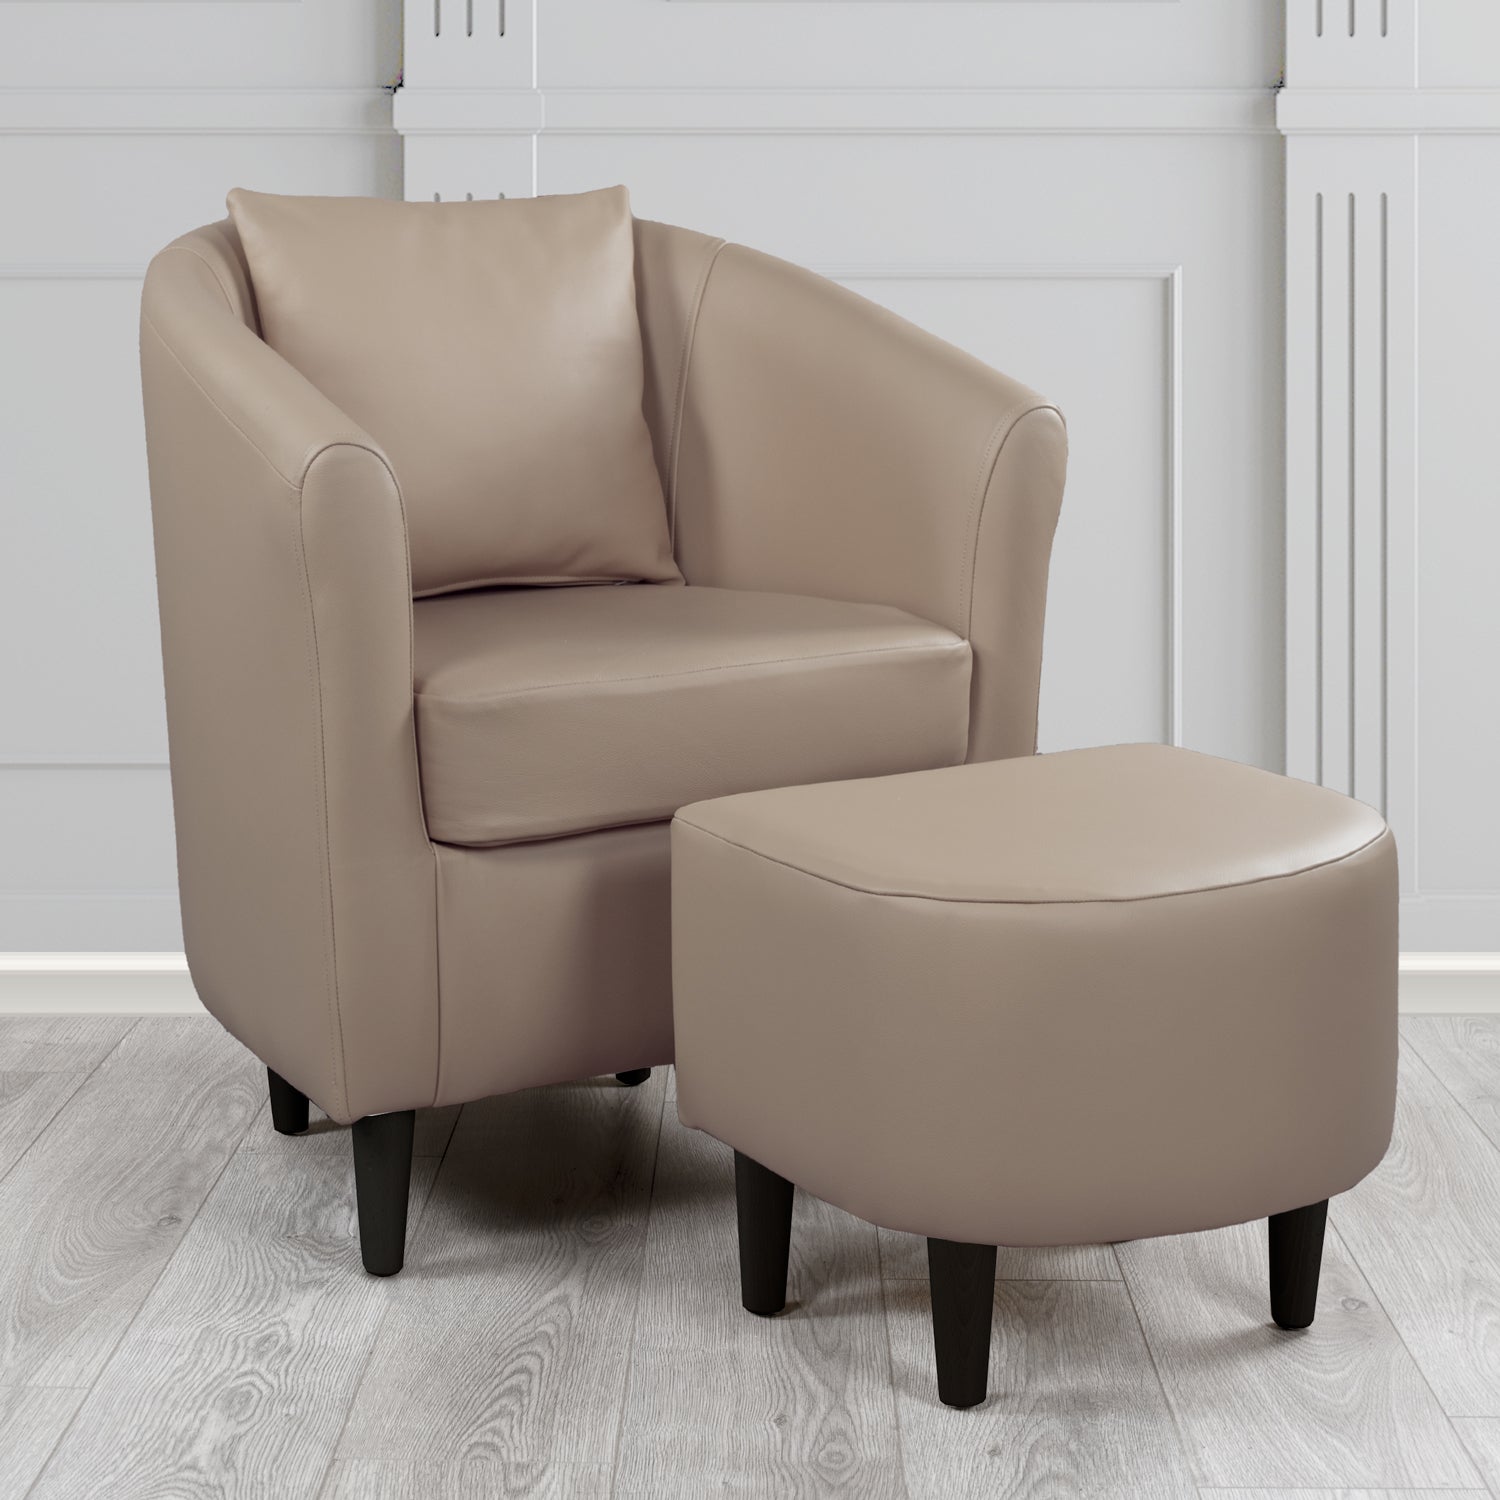 St Tropez Shelly Rocking Crib 5 Genuine Leather Tub Chair & Footstool Set With Scatter Cushion (6619517517866)